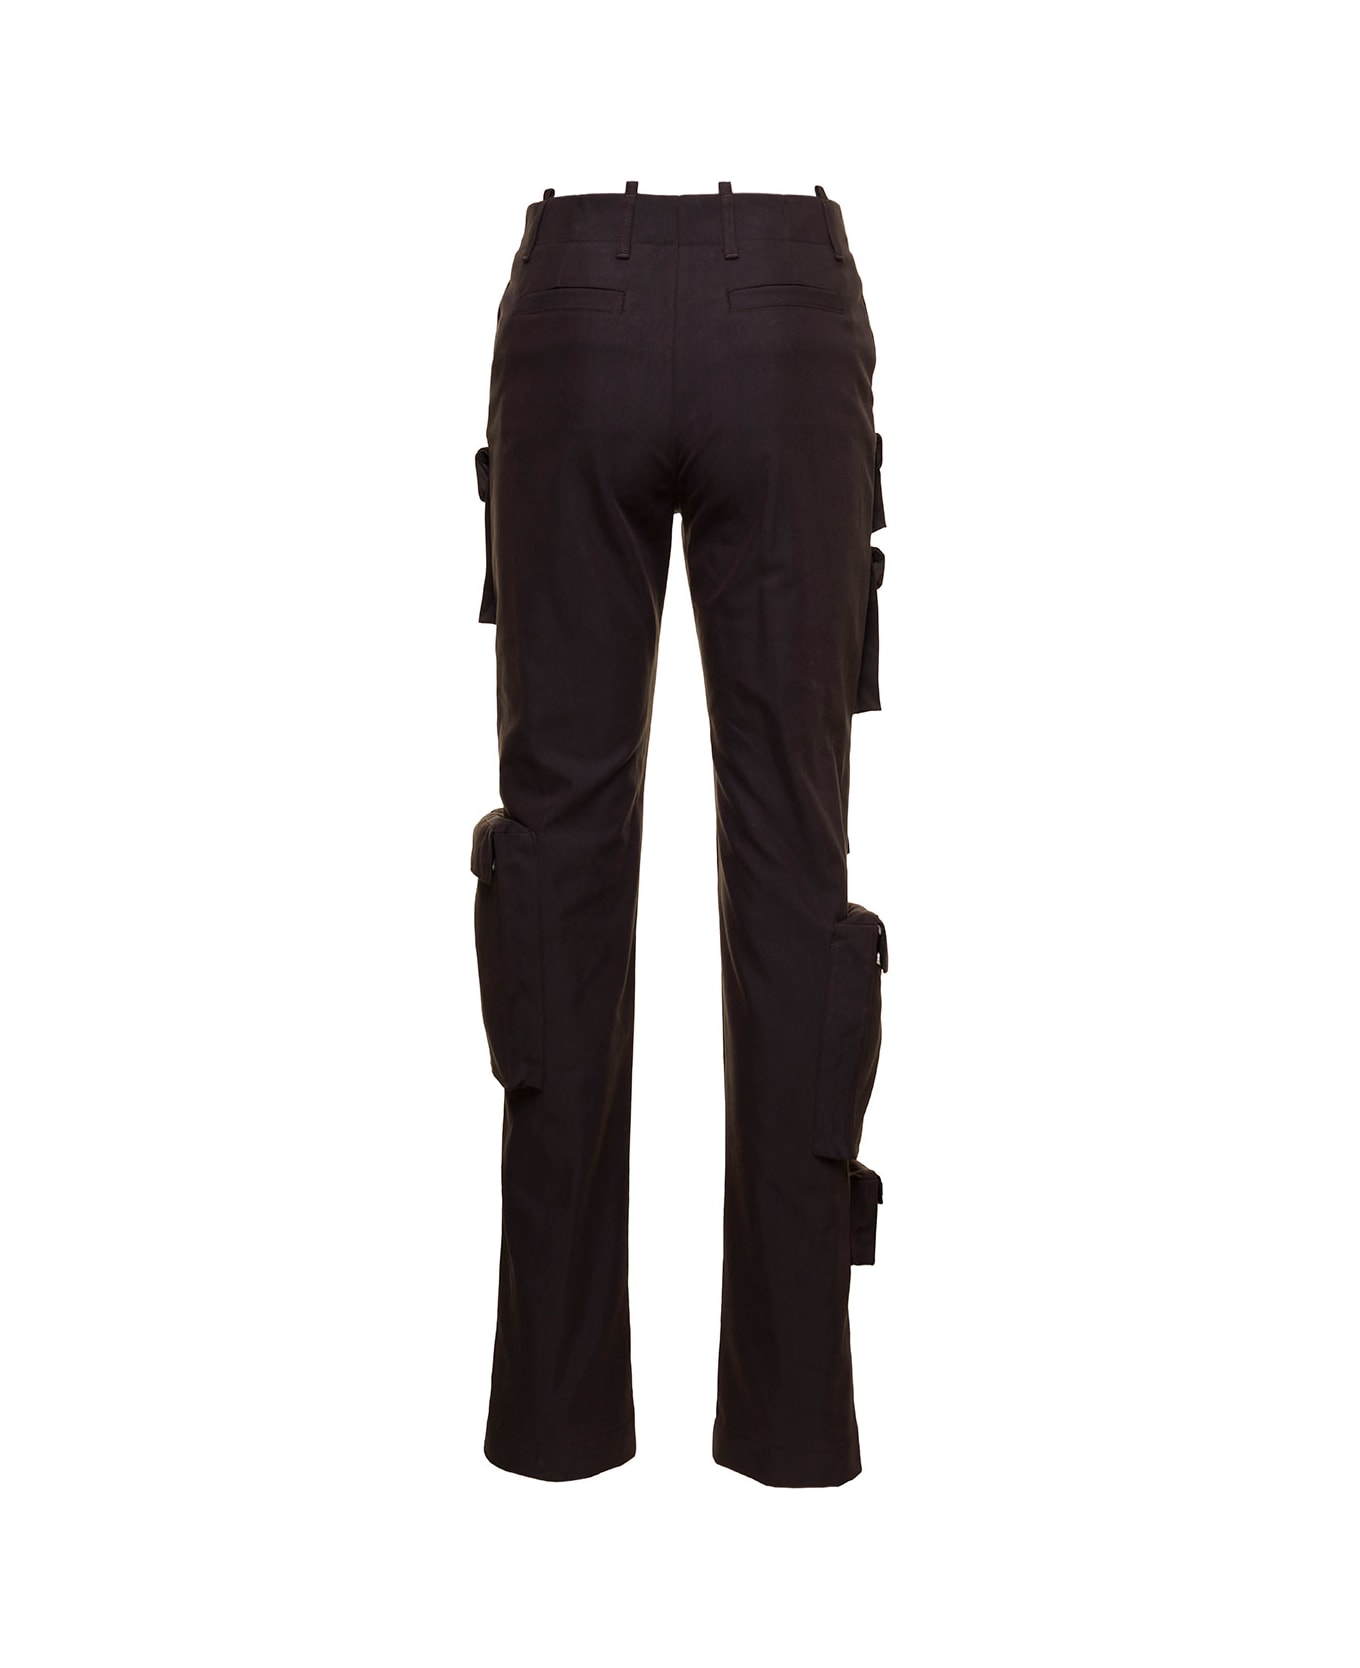 Off-White Multipocket Cargo Pants - Brown